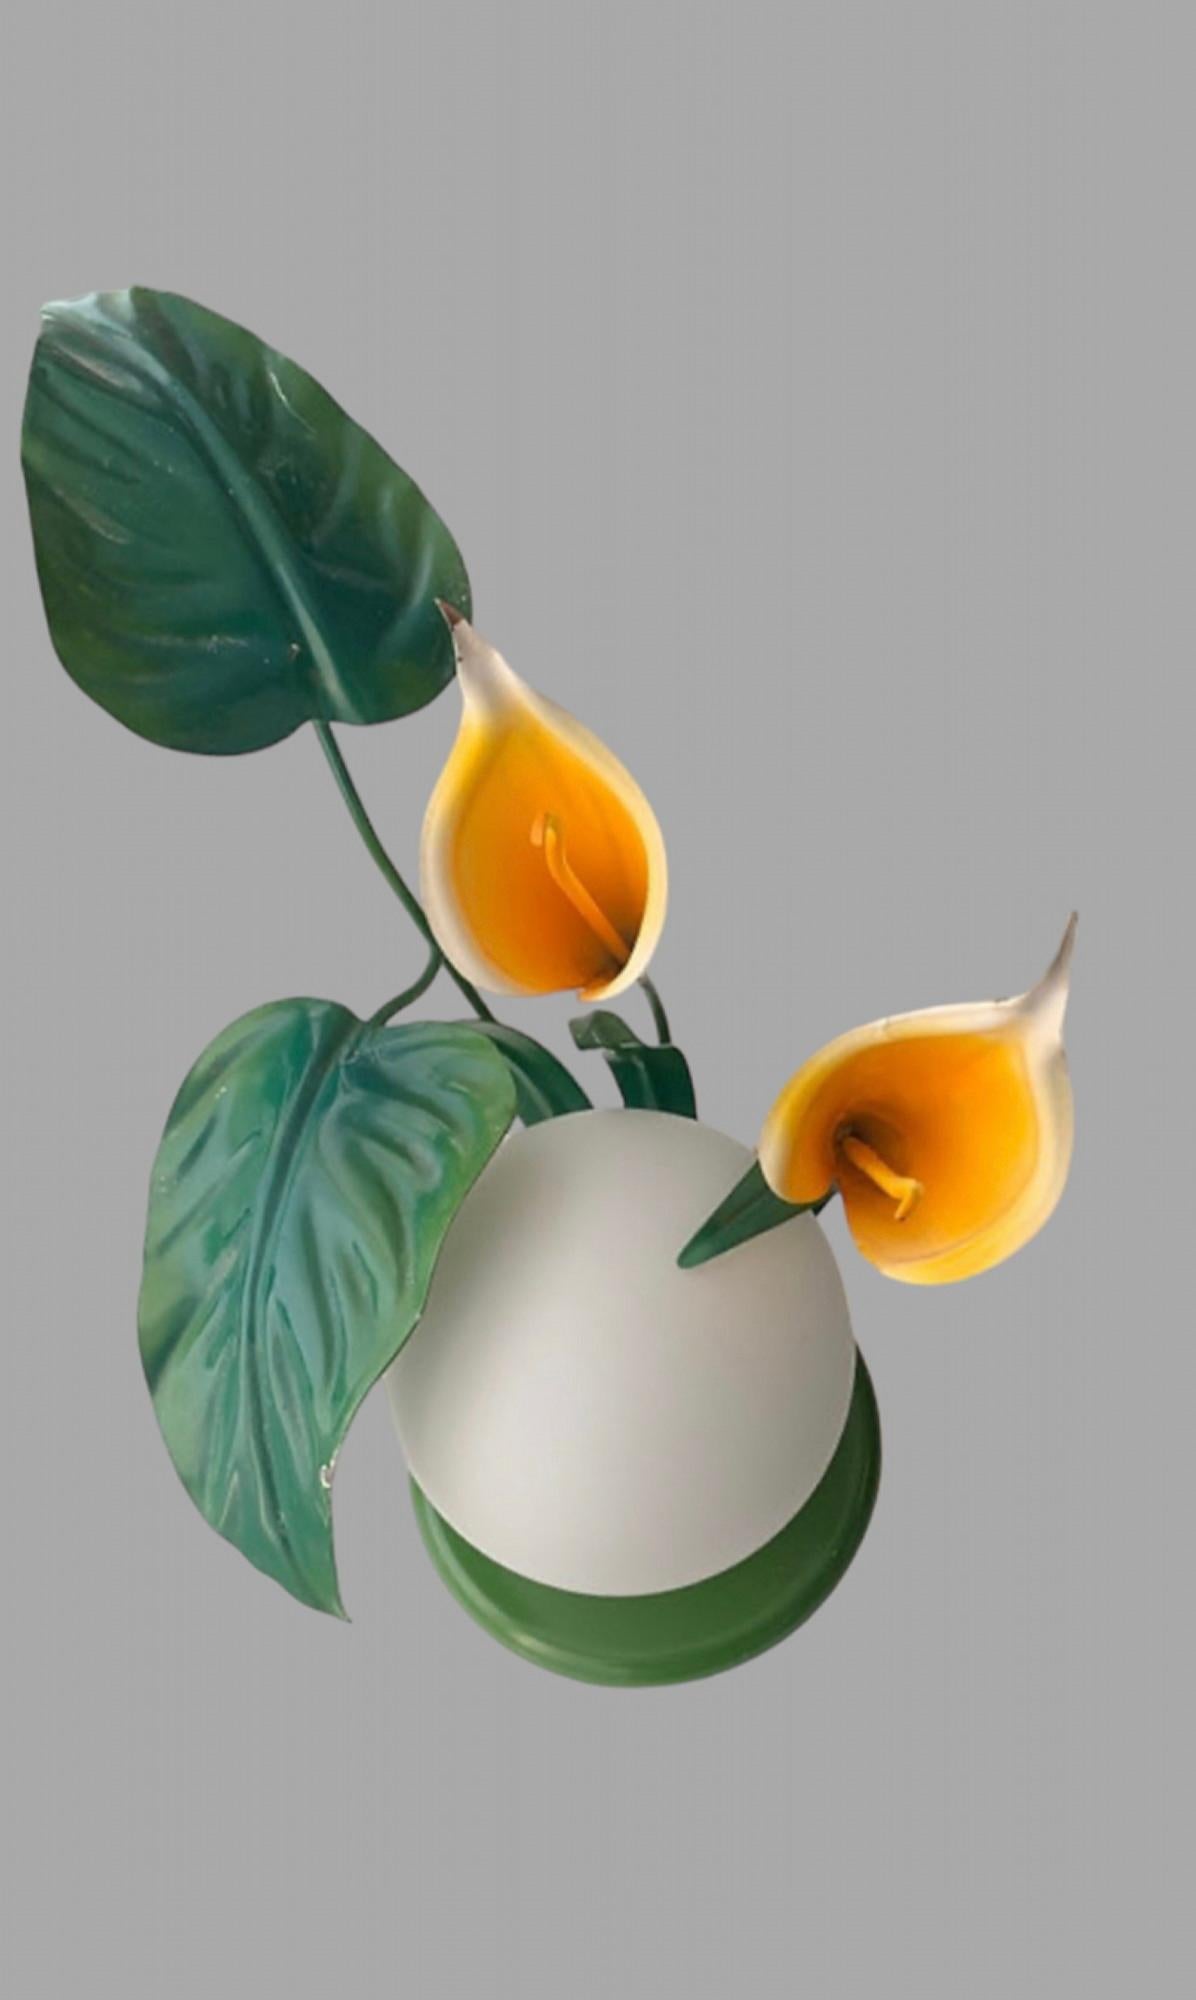 A Fantastically Kitsch 1960s Italian Metal Orb Table Lamp with Realistic Nalla Lilies and leaves. This table lamp goes with two matching chandeliers in the same style that we also have available. Please see our Lighting section for more information.